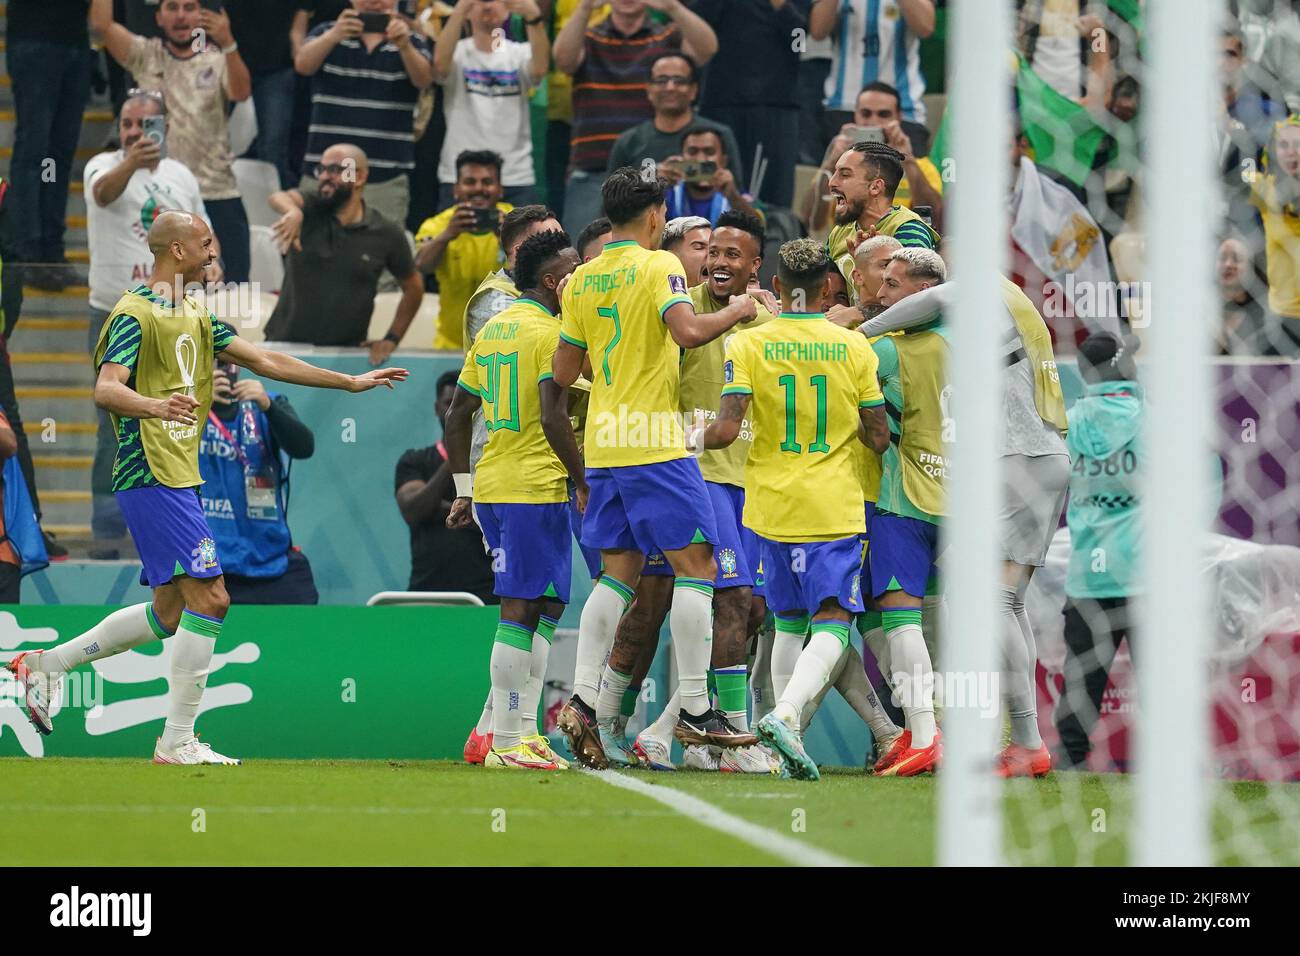 LUSAIL, QATAR - NOVEMBER 24: Players of Brazil celebrate after Richarlison scoring his second goal during the FIFA World Cup Qatar 2022 group G match between Brazil and Serbia at Lusail Stadium on November 24, 2022 in Lusail, Qatar. (Photo by Florencia Tan Jun/PxImages) Credit: Px Images/Alamy Live News Stock Photo